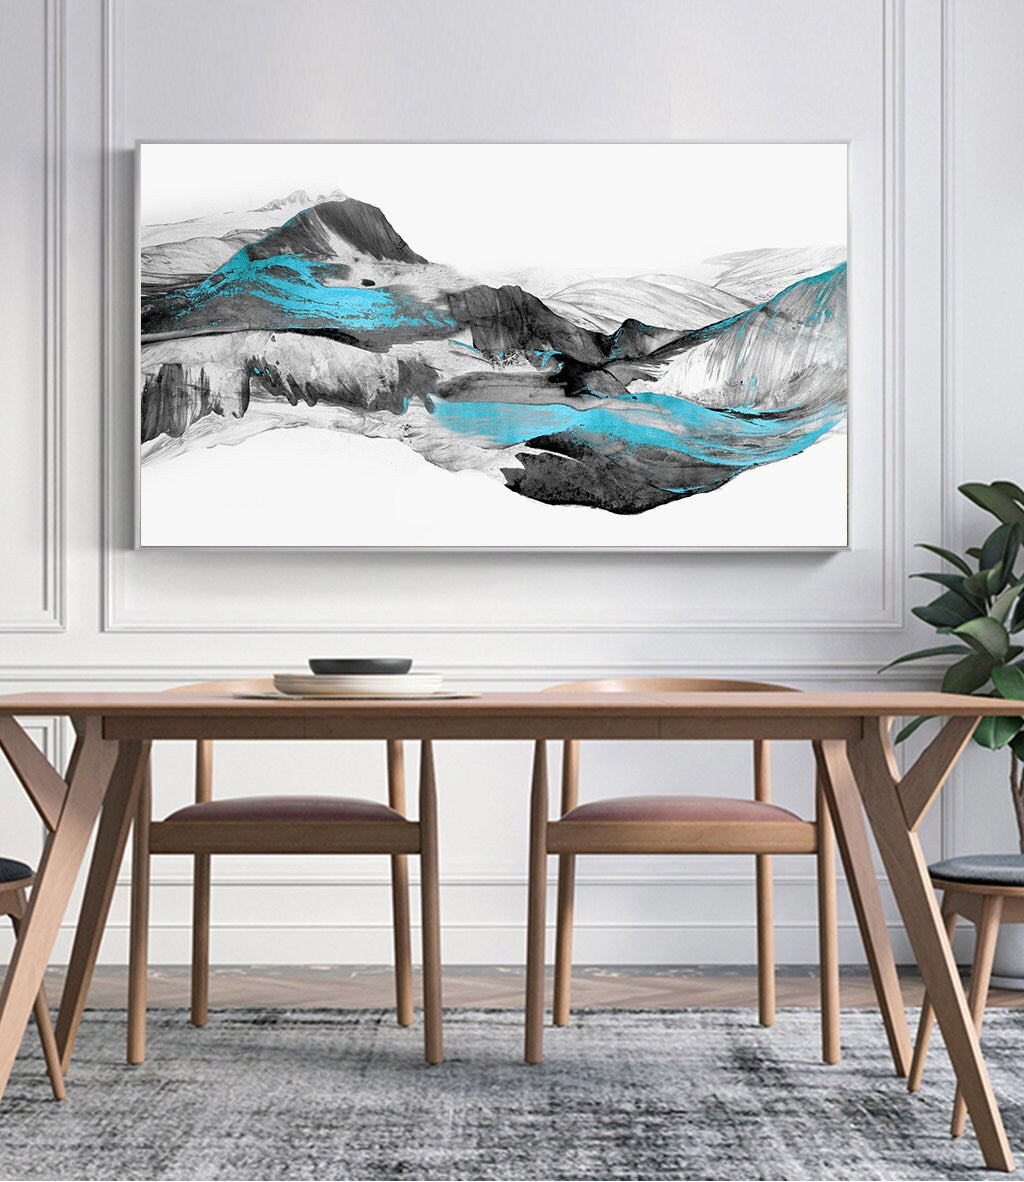 Large framed abstract canvas print, black white printable artwork in floating frame, modern abstract mountains wall art for living room